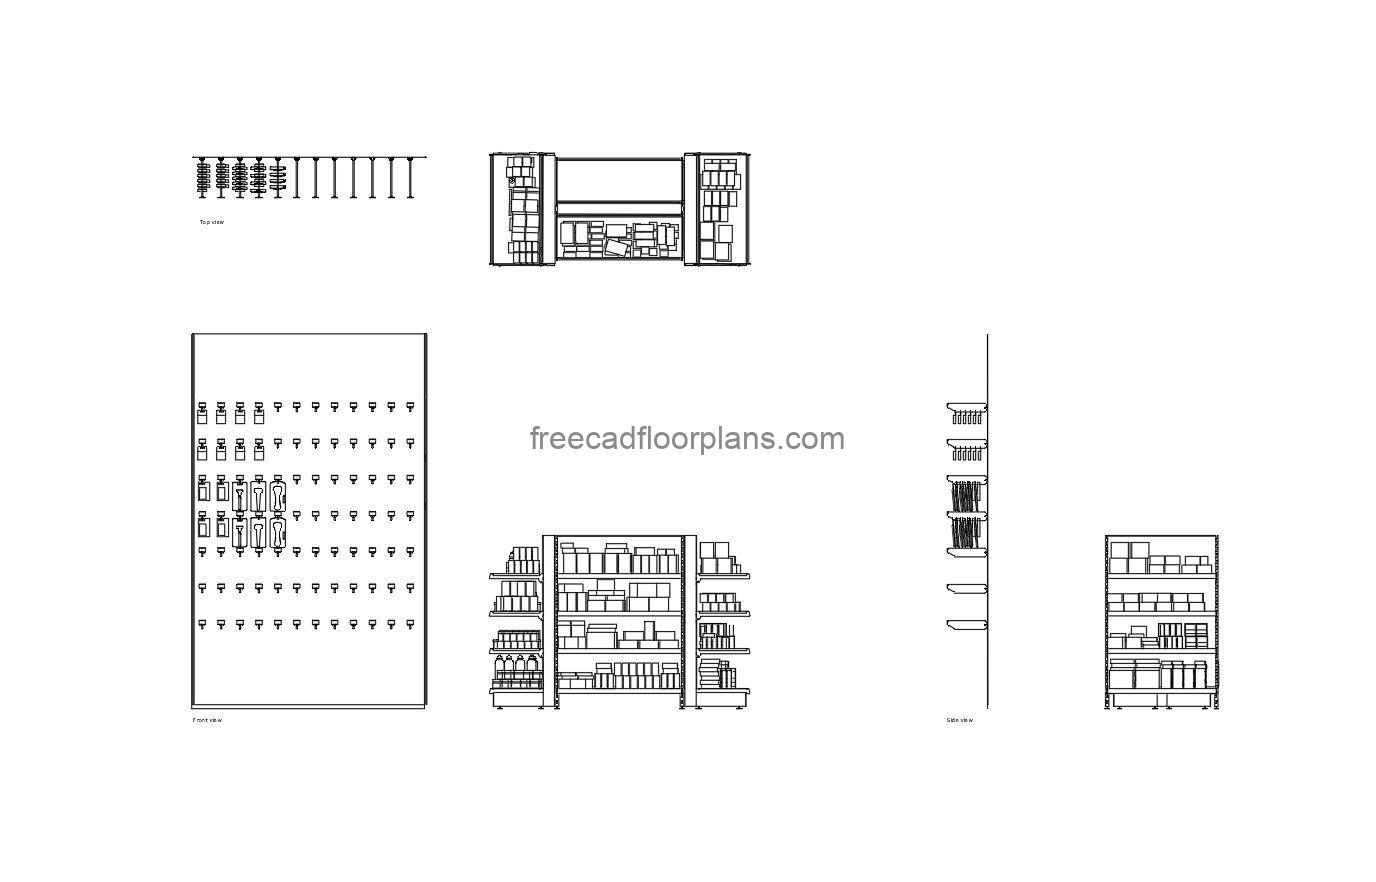 pharmacy shelving autocad drawing, plan and elevation 2d views, dwg file free for download